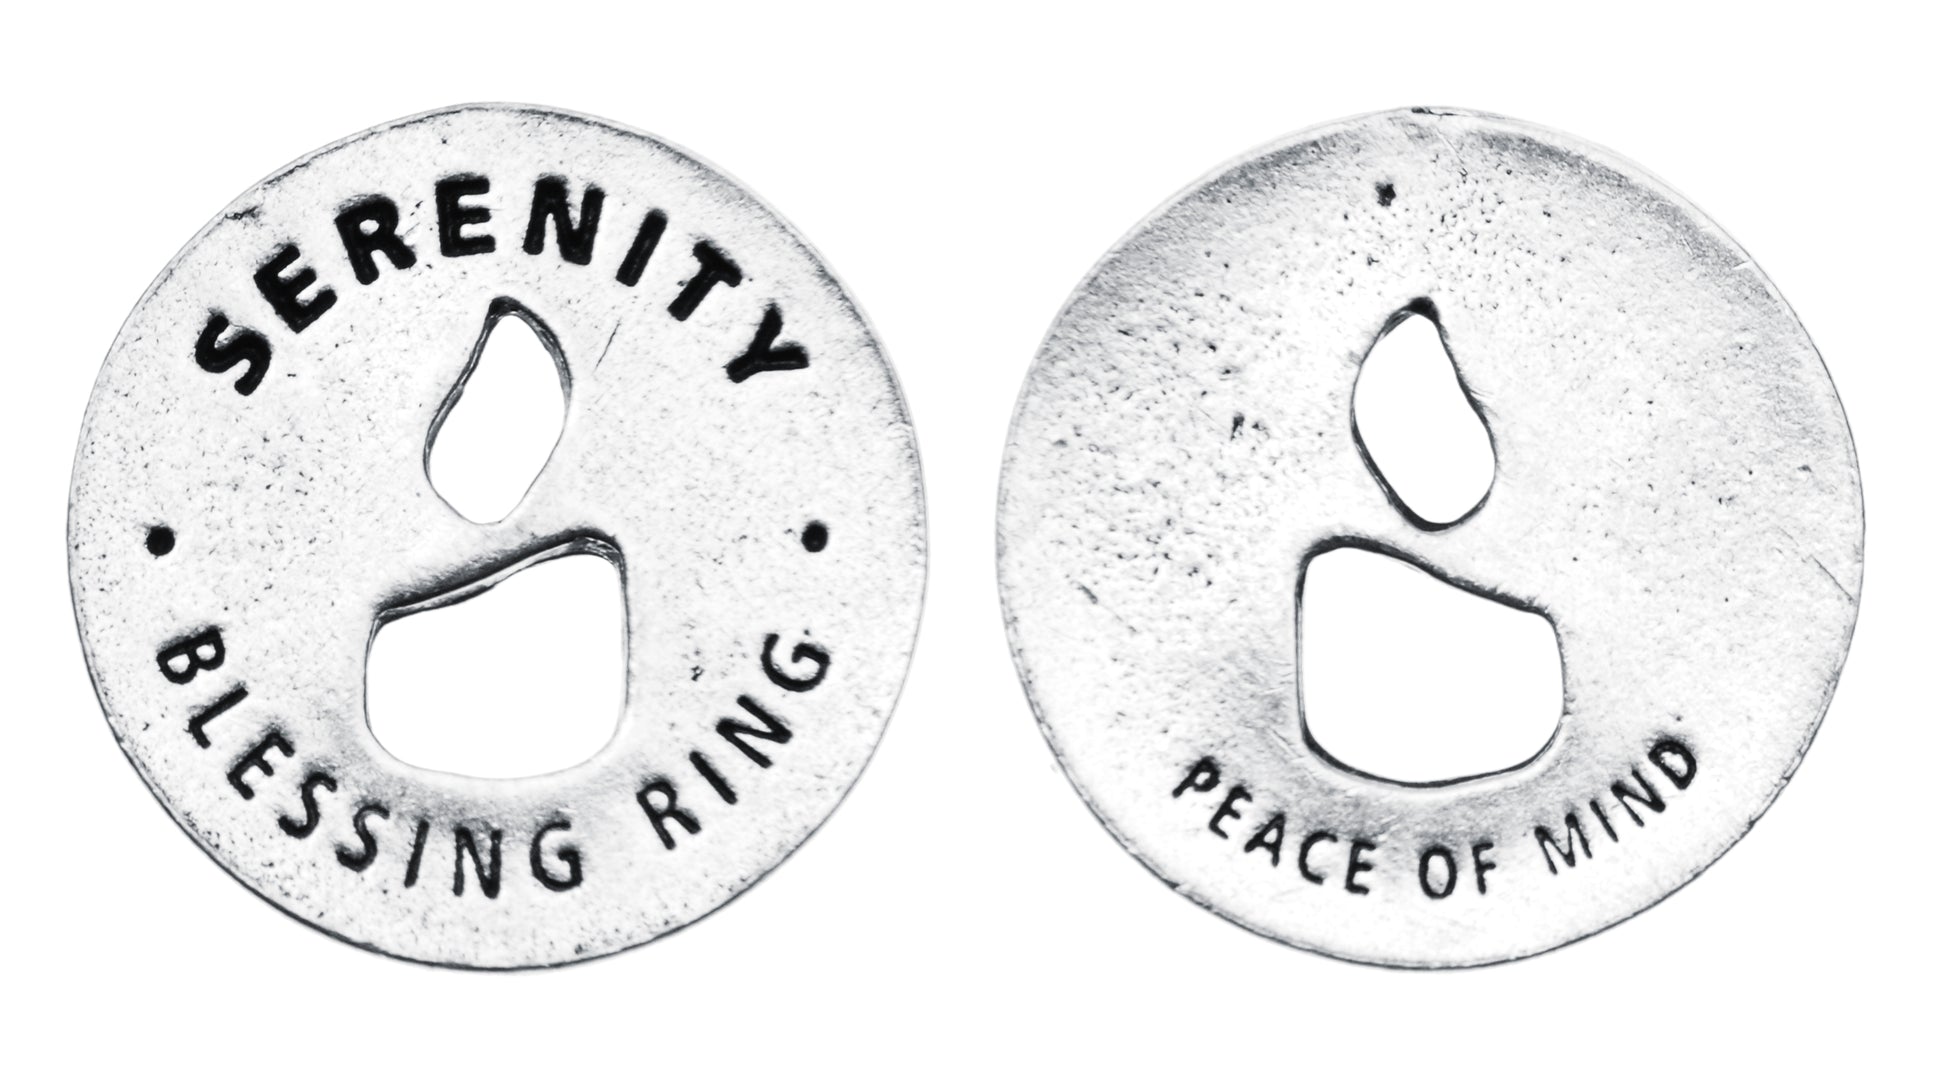 Serenity Blessing Ring front and back